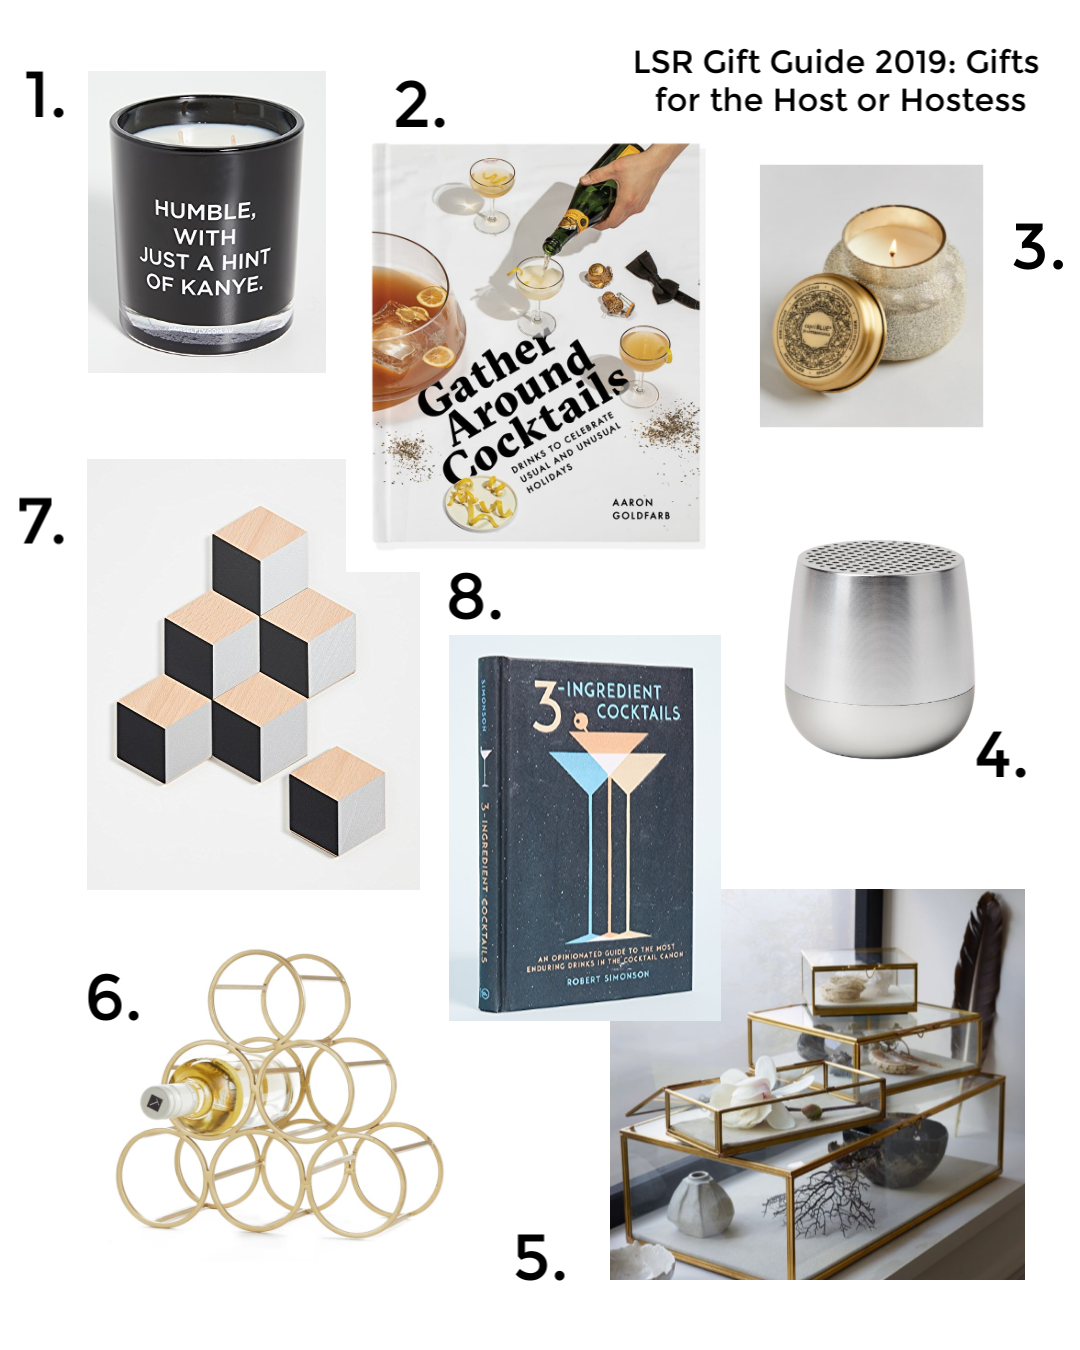 LSR Gift Guide 2019: Gifts for the Host and Hostess